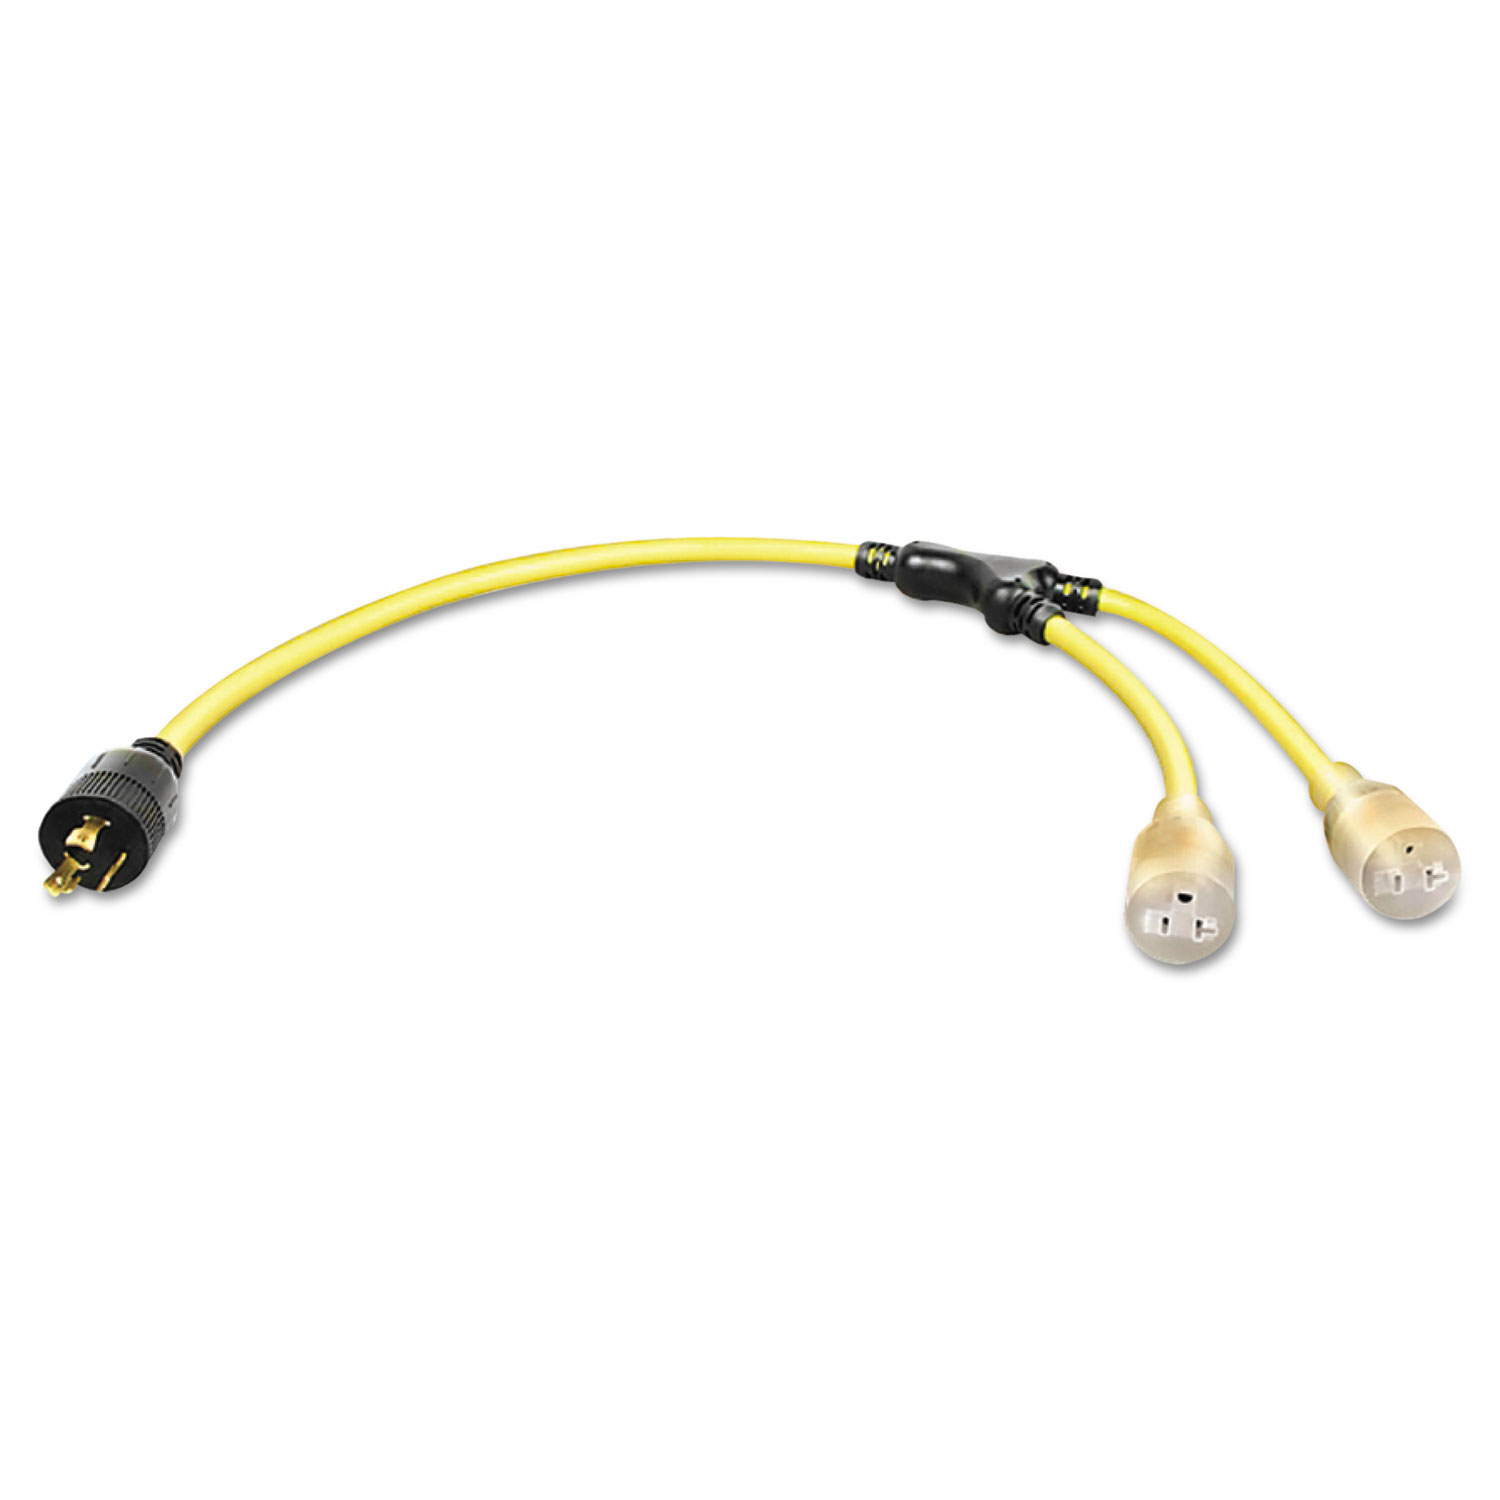 L5-30P Extension Cord, Lighted, 10/3 STOW, 3ft, 5-2